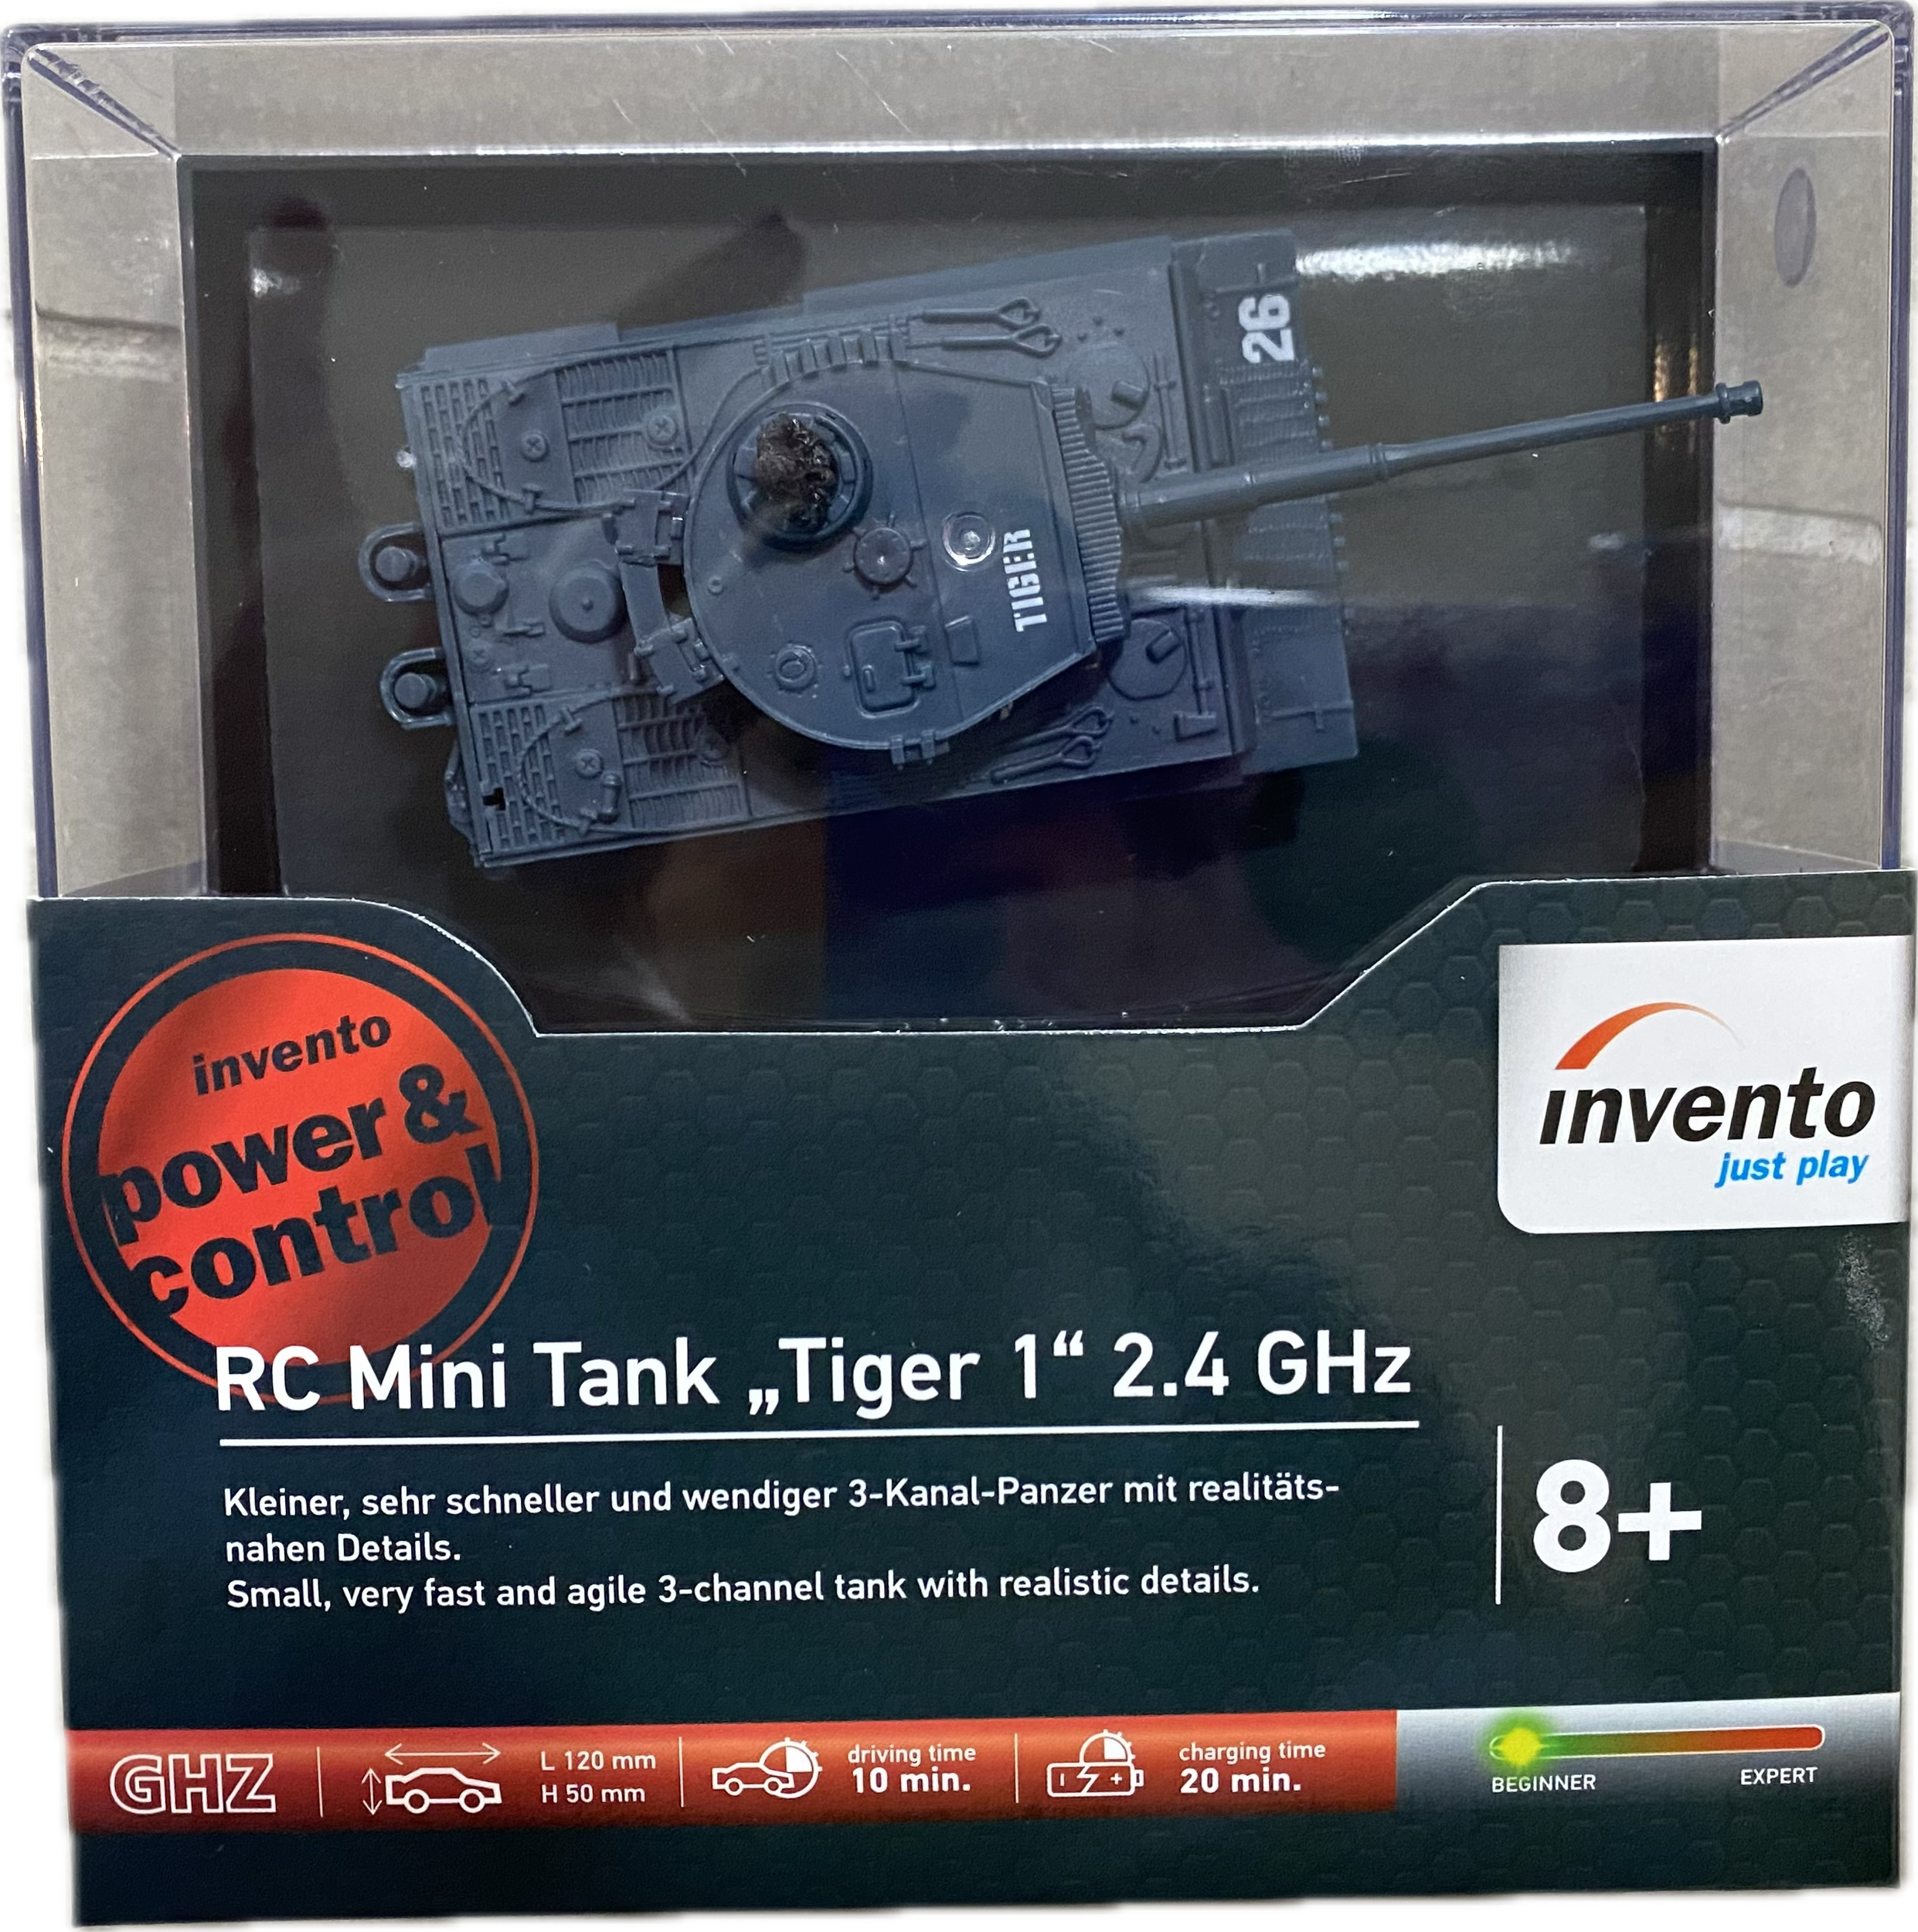 Invento RC Mini Tank Tiger 1" 2.4 GHz (Assorted Colors) 500072